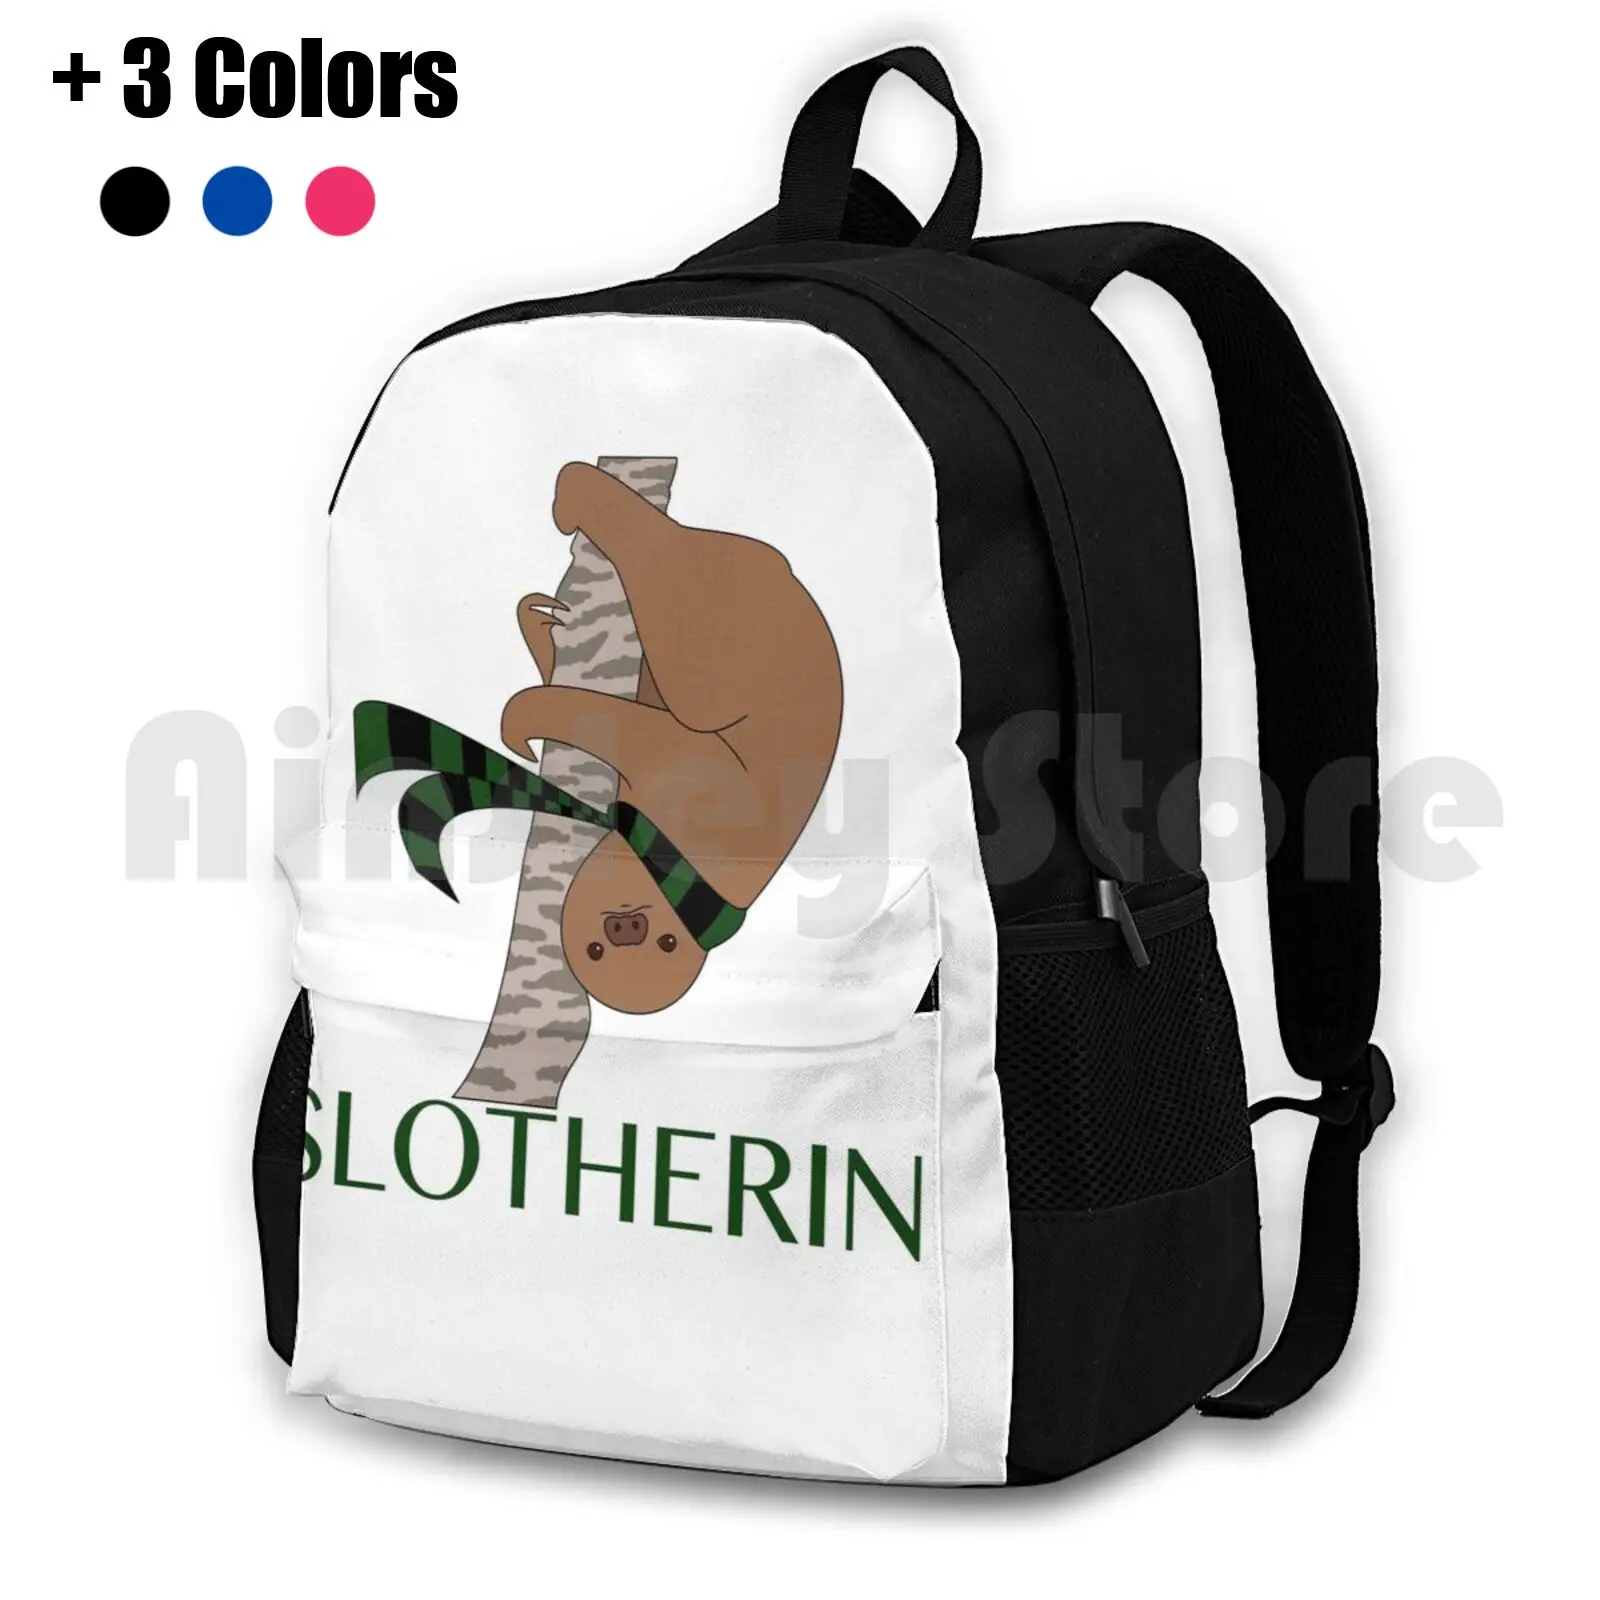 

Slotherin Outdoor Hiking Backpack Riding Climbing Sports Bag Graphic Design Magic Witch Wizard Animal Sloth Wand Text Funny Pun